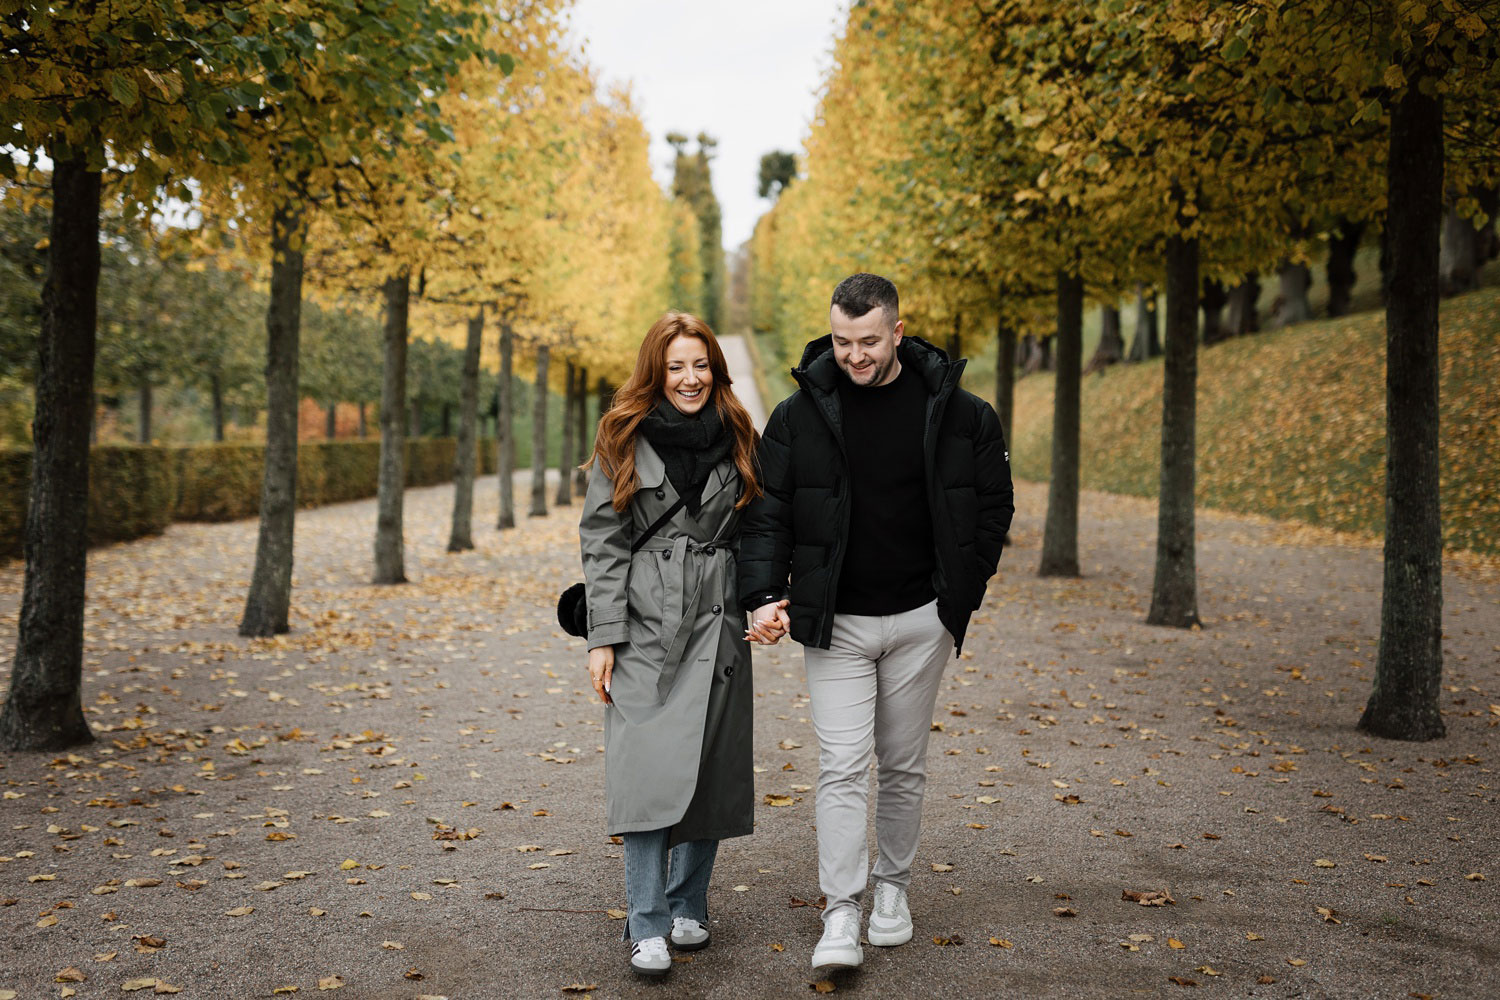 Frederiksborg Castle engagement photography session in the fall